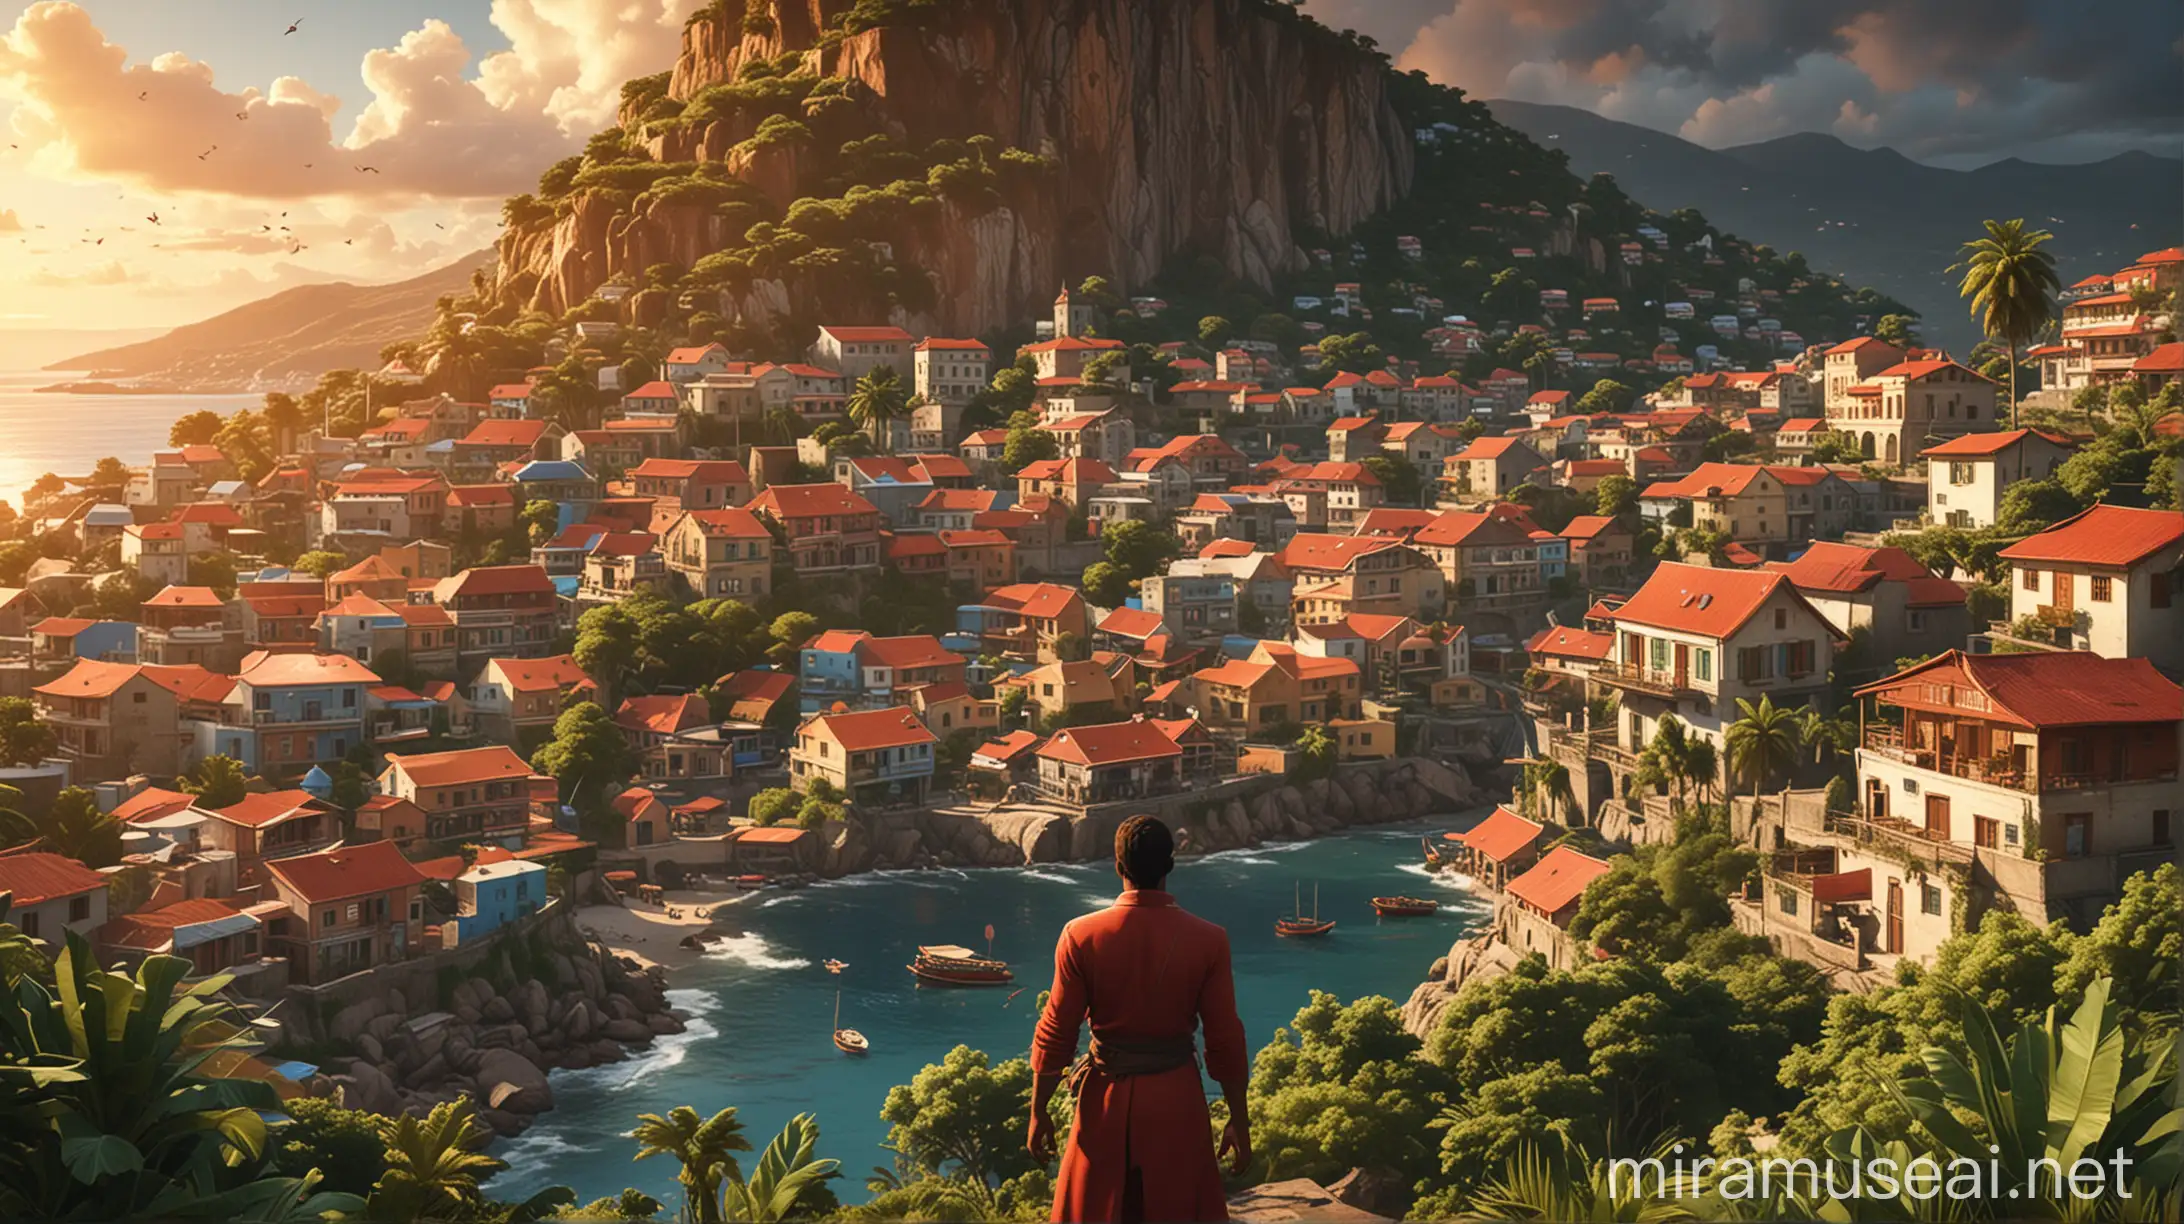 Create a dynamic and captivating video game poster featuring a breathtaking landscape inspired by Guadeloupe. The scene captures the essence of the island during the golden hour, with the warm, glowing light illuminating the coastal town nestled between lush green hills and a sparkling blue bay. The town's red-roofed houses and narrow winding streets are bathed in a golden hue, enhancing the natural beauty and cultural richness. In the foreground in the middle, a male main character stands confidently, but his face is not visible, only his human figure is seen . The poster should evoke a sense of excitement and discovery, with vibrant colors, dynamic composition, and an inviting atmosphere that draws players into the game's world. --v 5 --ar 16:9 --q 2 --style video game poster